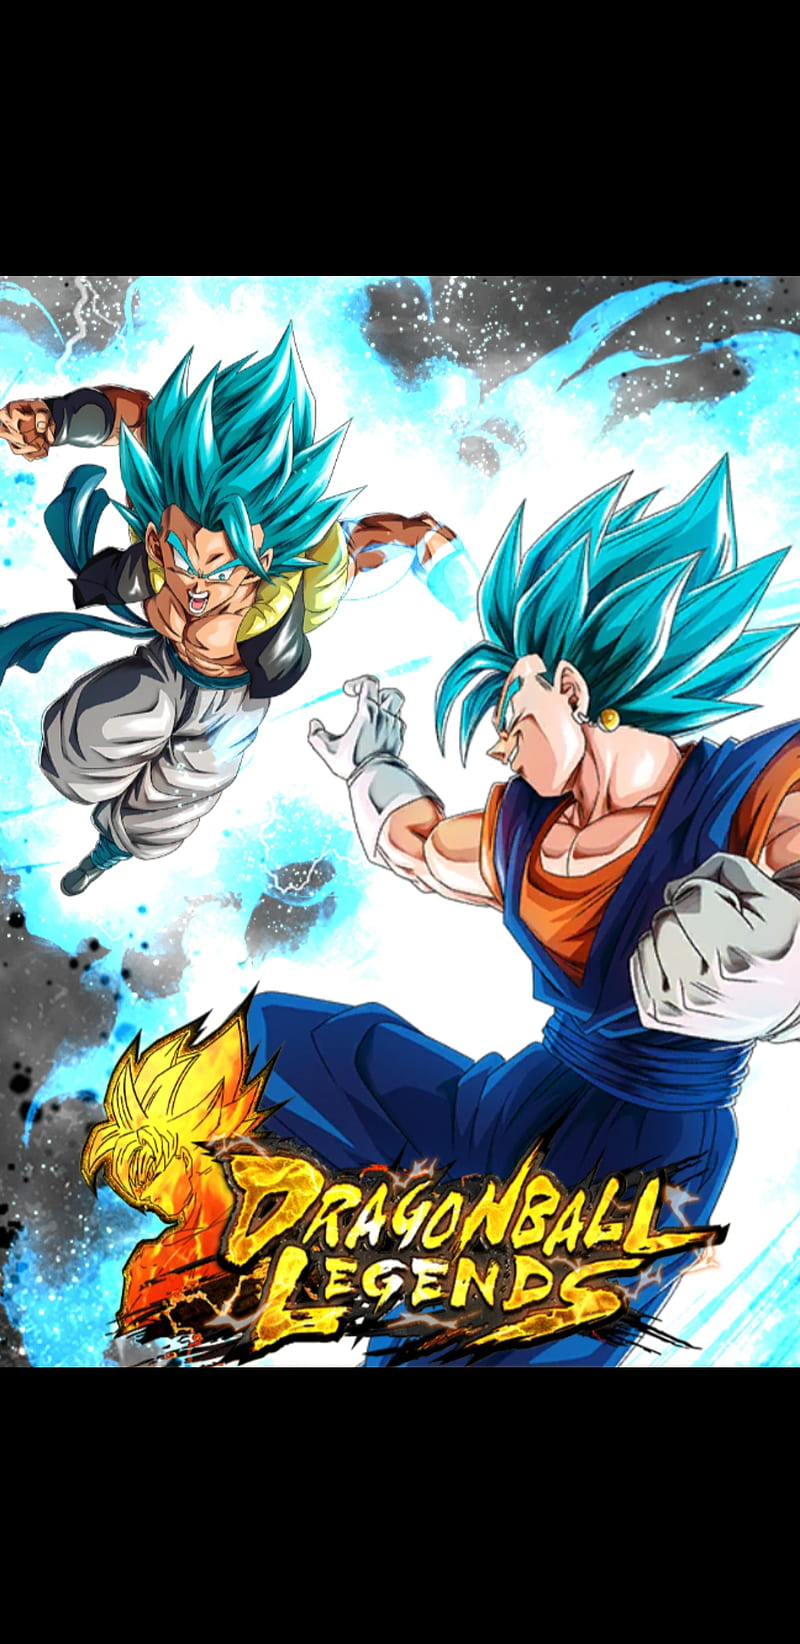 Happy New Year 21  New Wallpapers Android 21 Goku Vegeta Vegito and  GogetaMore resolutions in comments  rDBZDokkanBattle